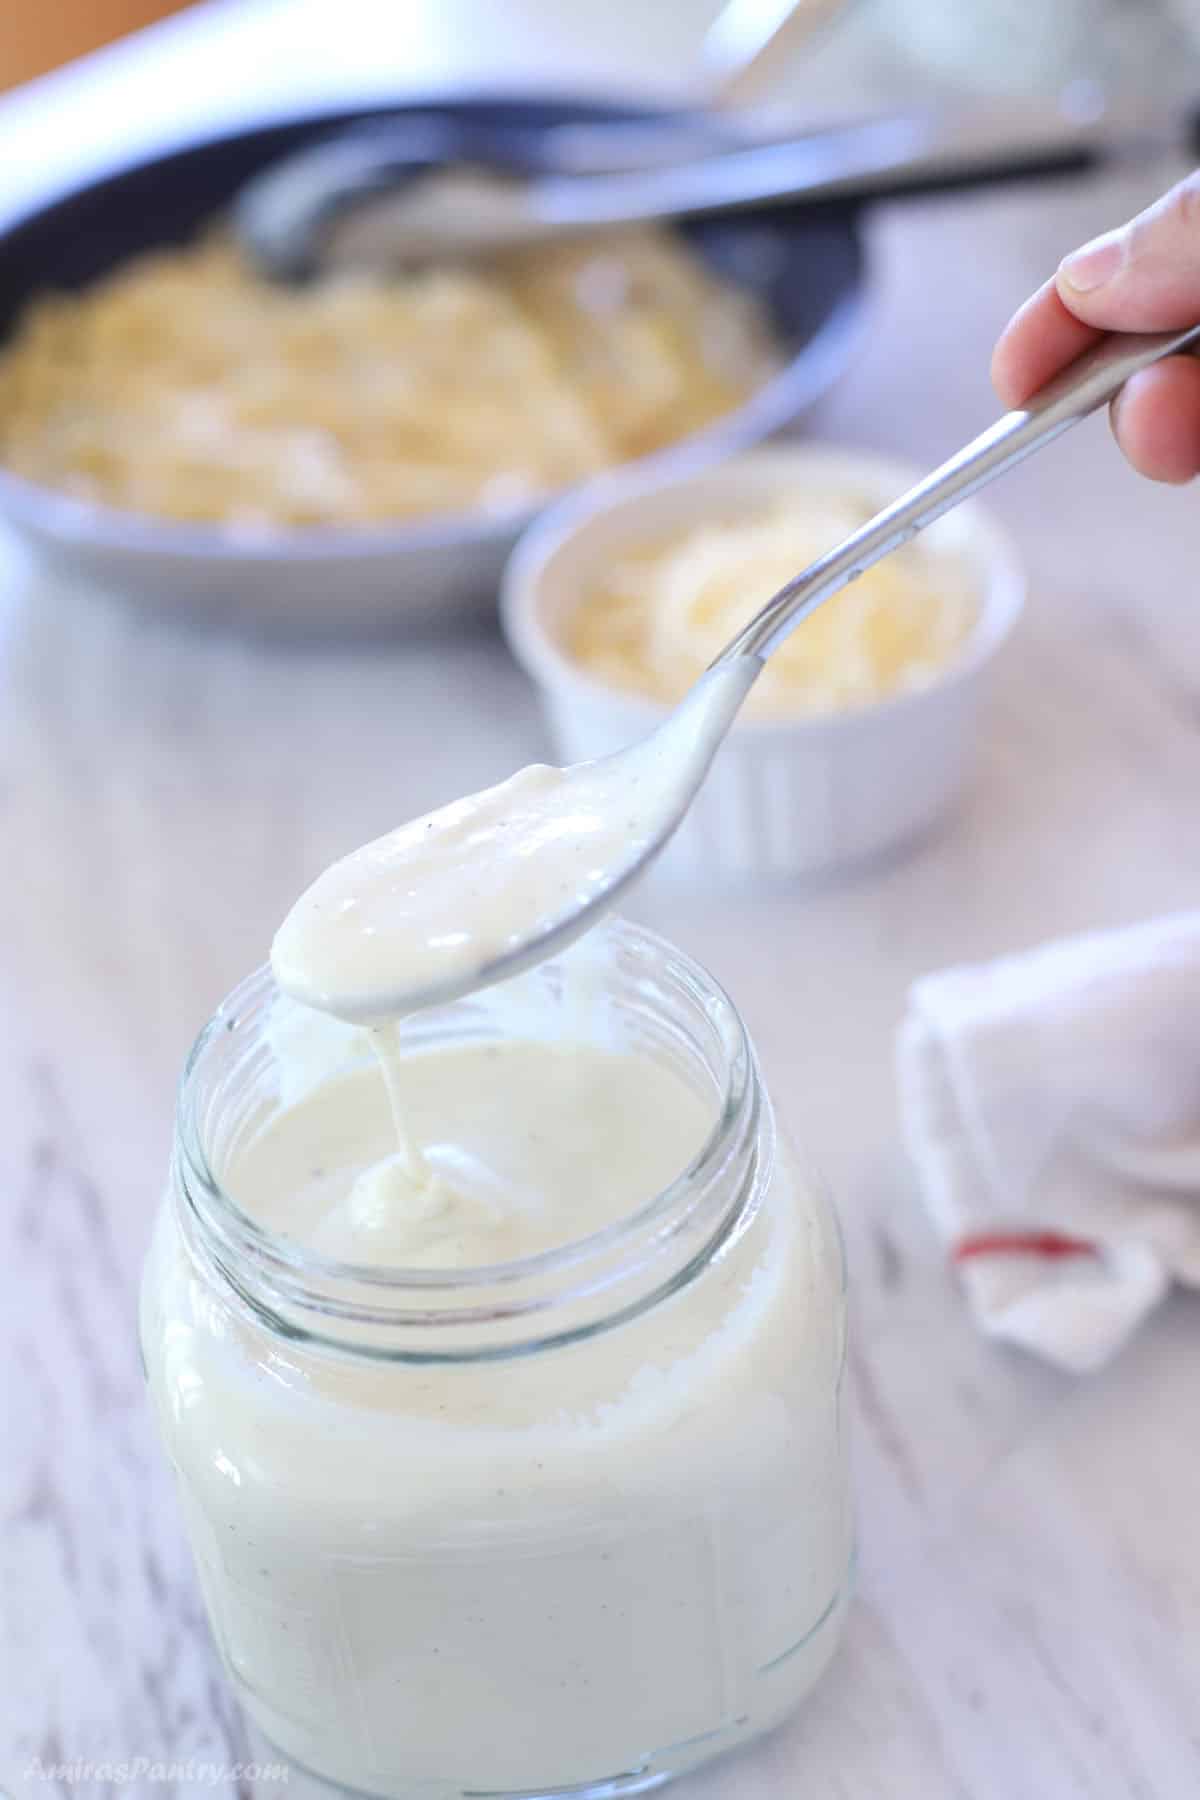 A spoon scooping some alfredo sauce from a jar.